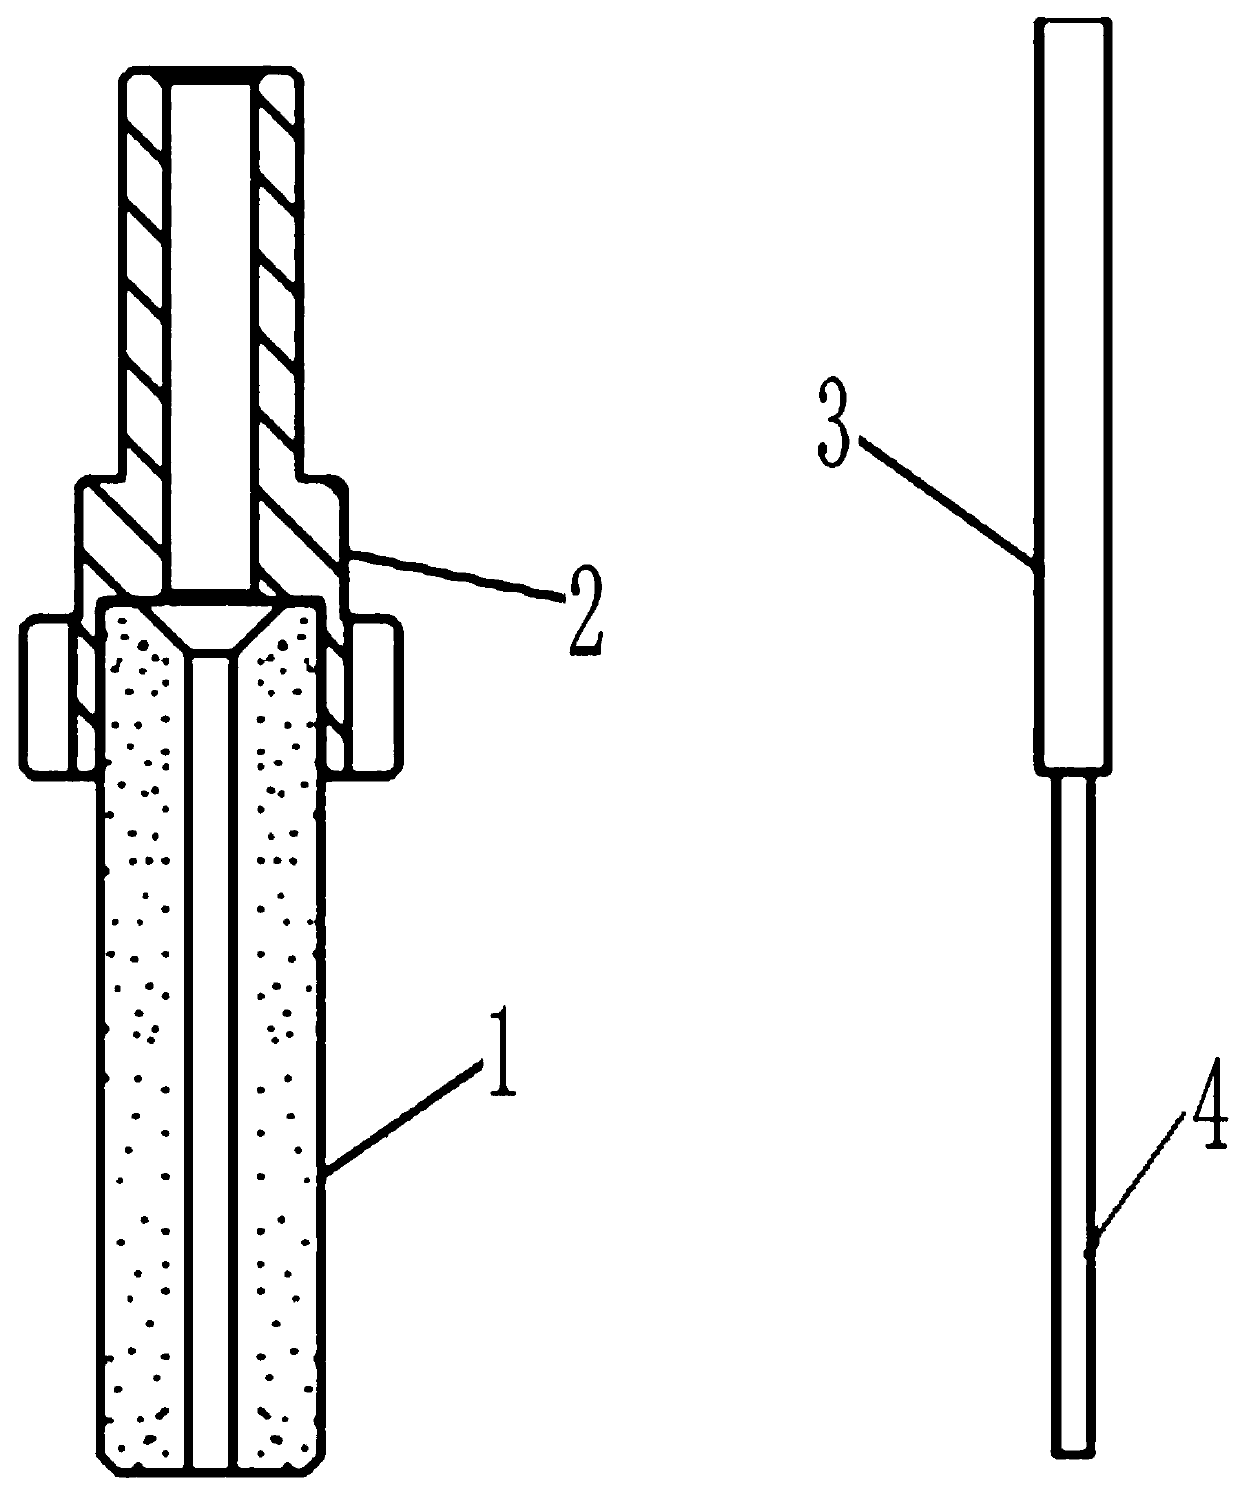 Coupling fiber manufacturing method and assembly clamp